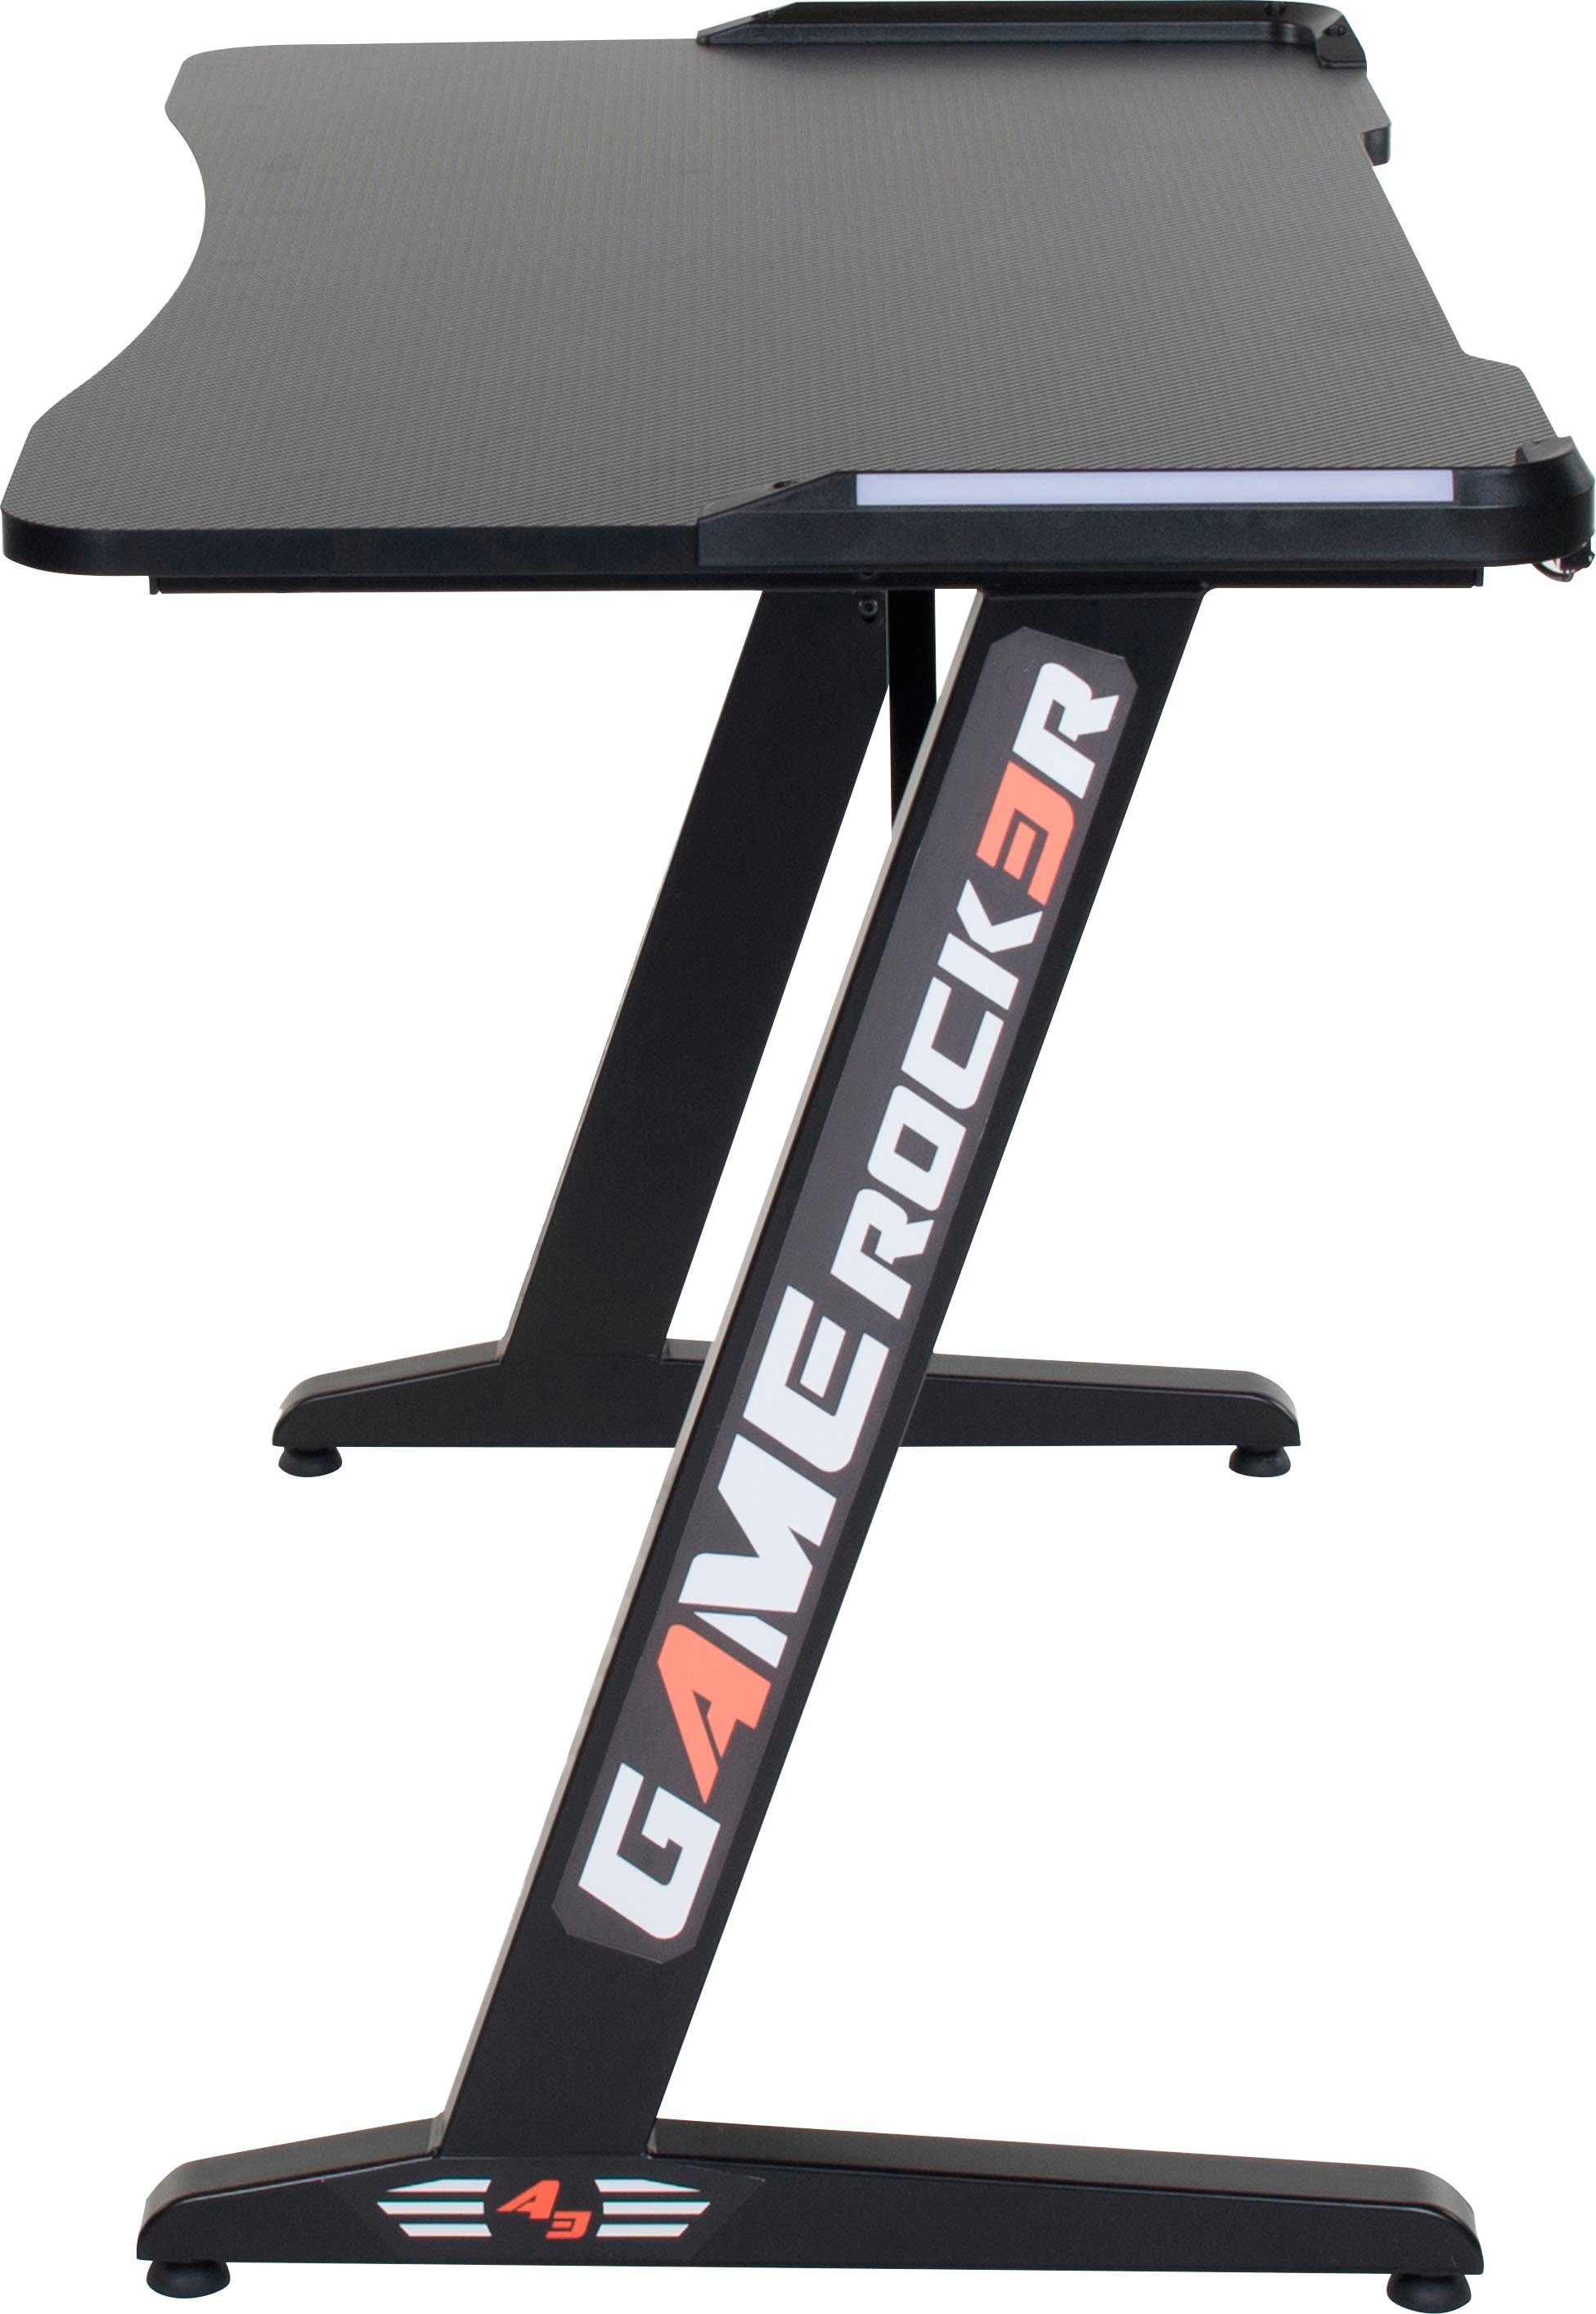 Gamingtisch Duo Game-Rocker LED-RGB Beleuchtung GT-22, Collection